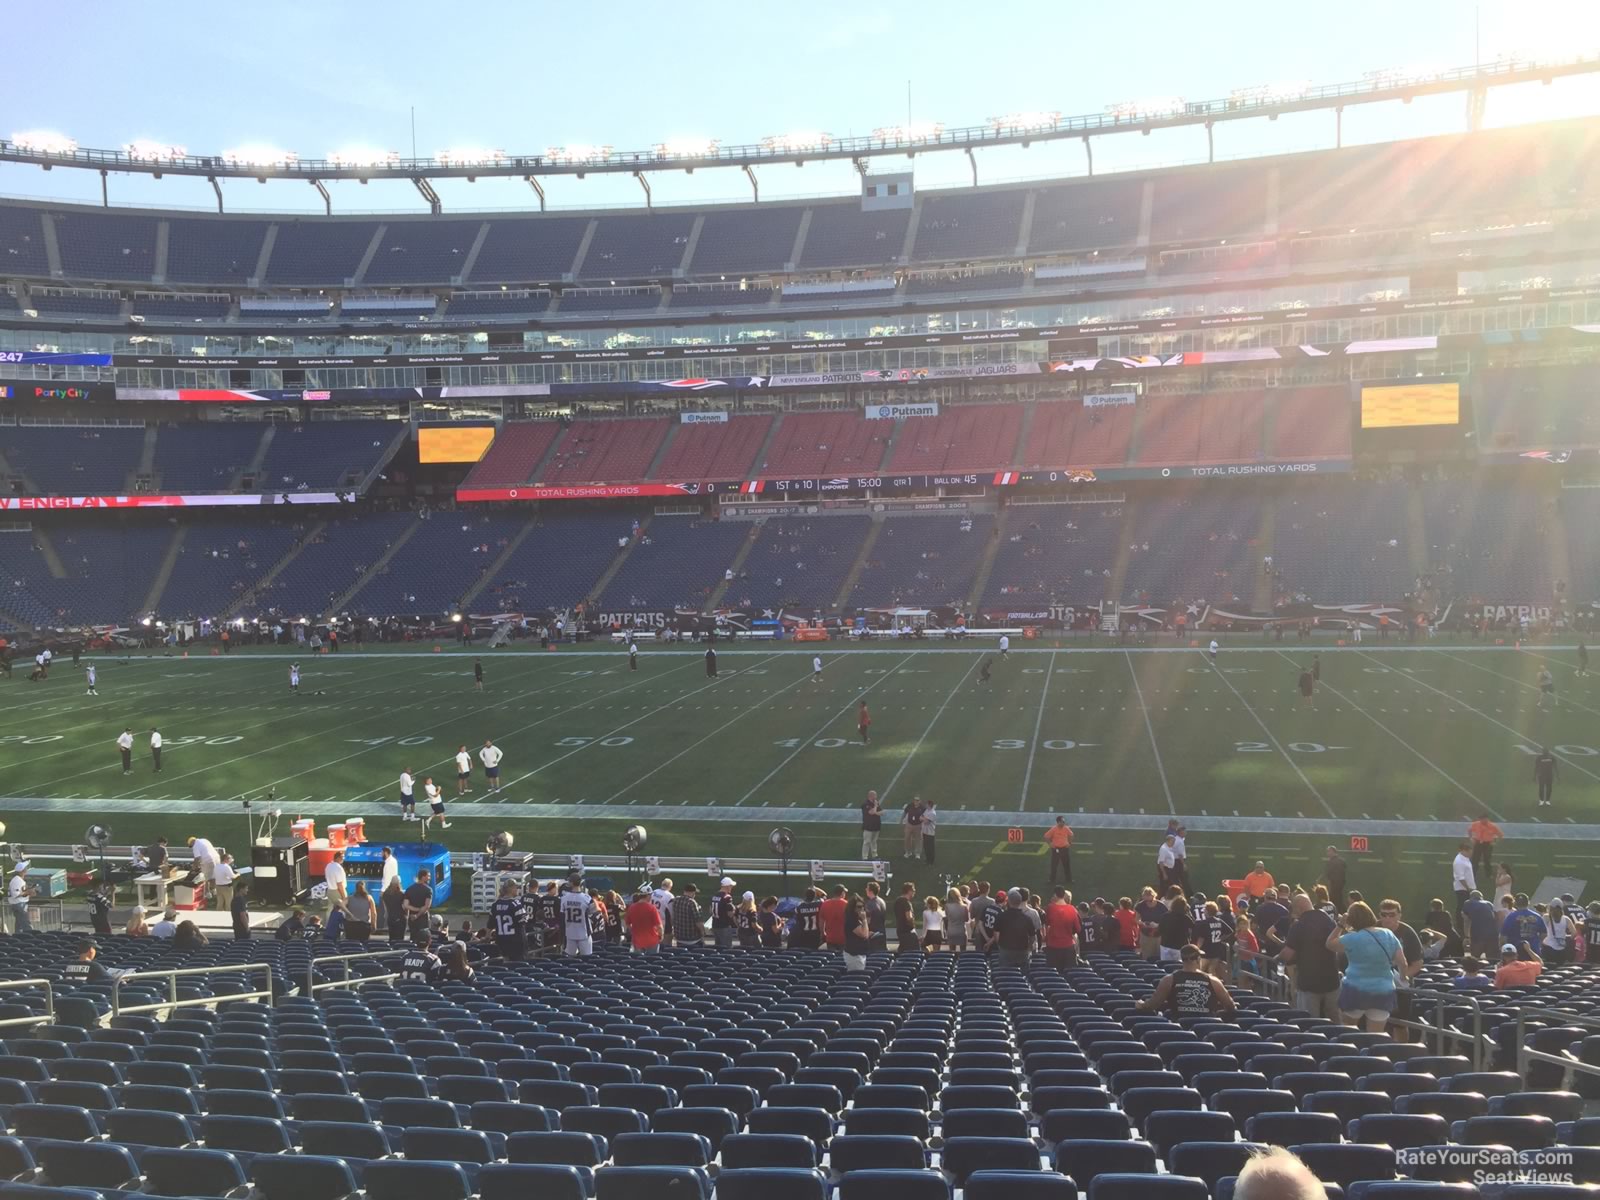 section 108, row 29 seat view  for football - gillette stadium